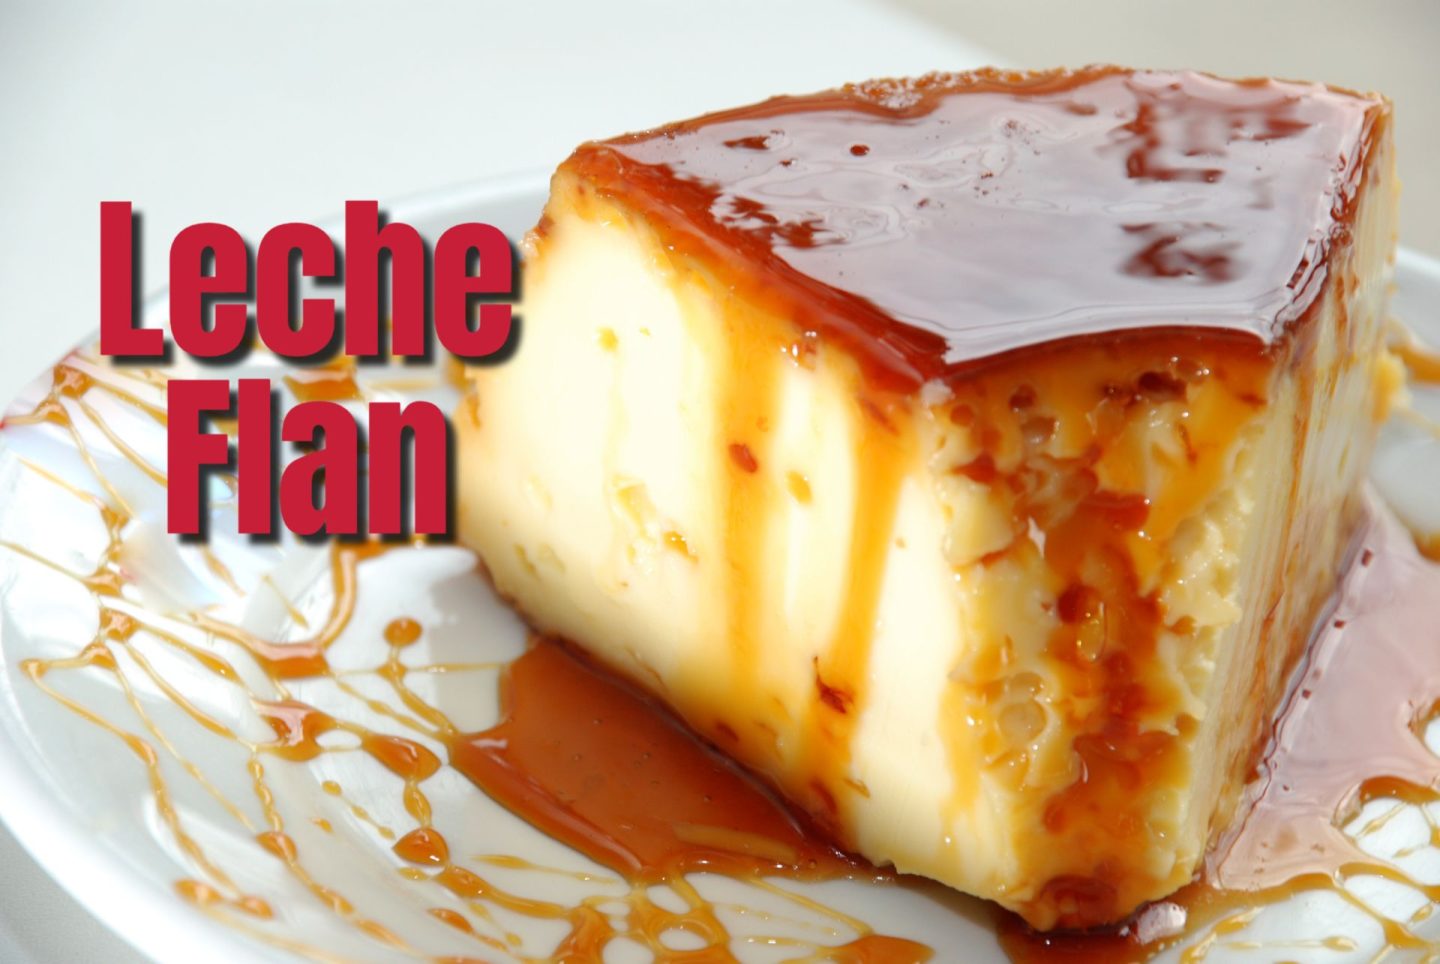 The Philippines and Leche Flan